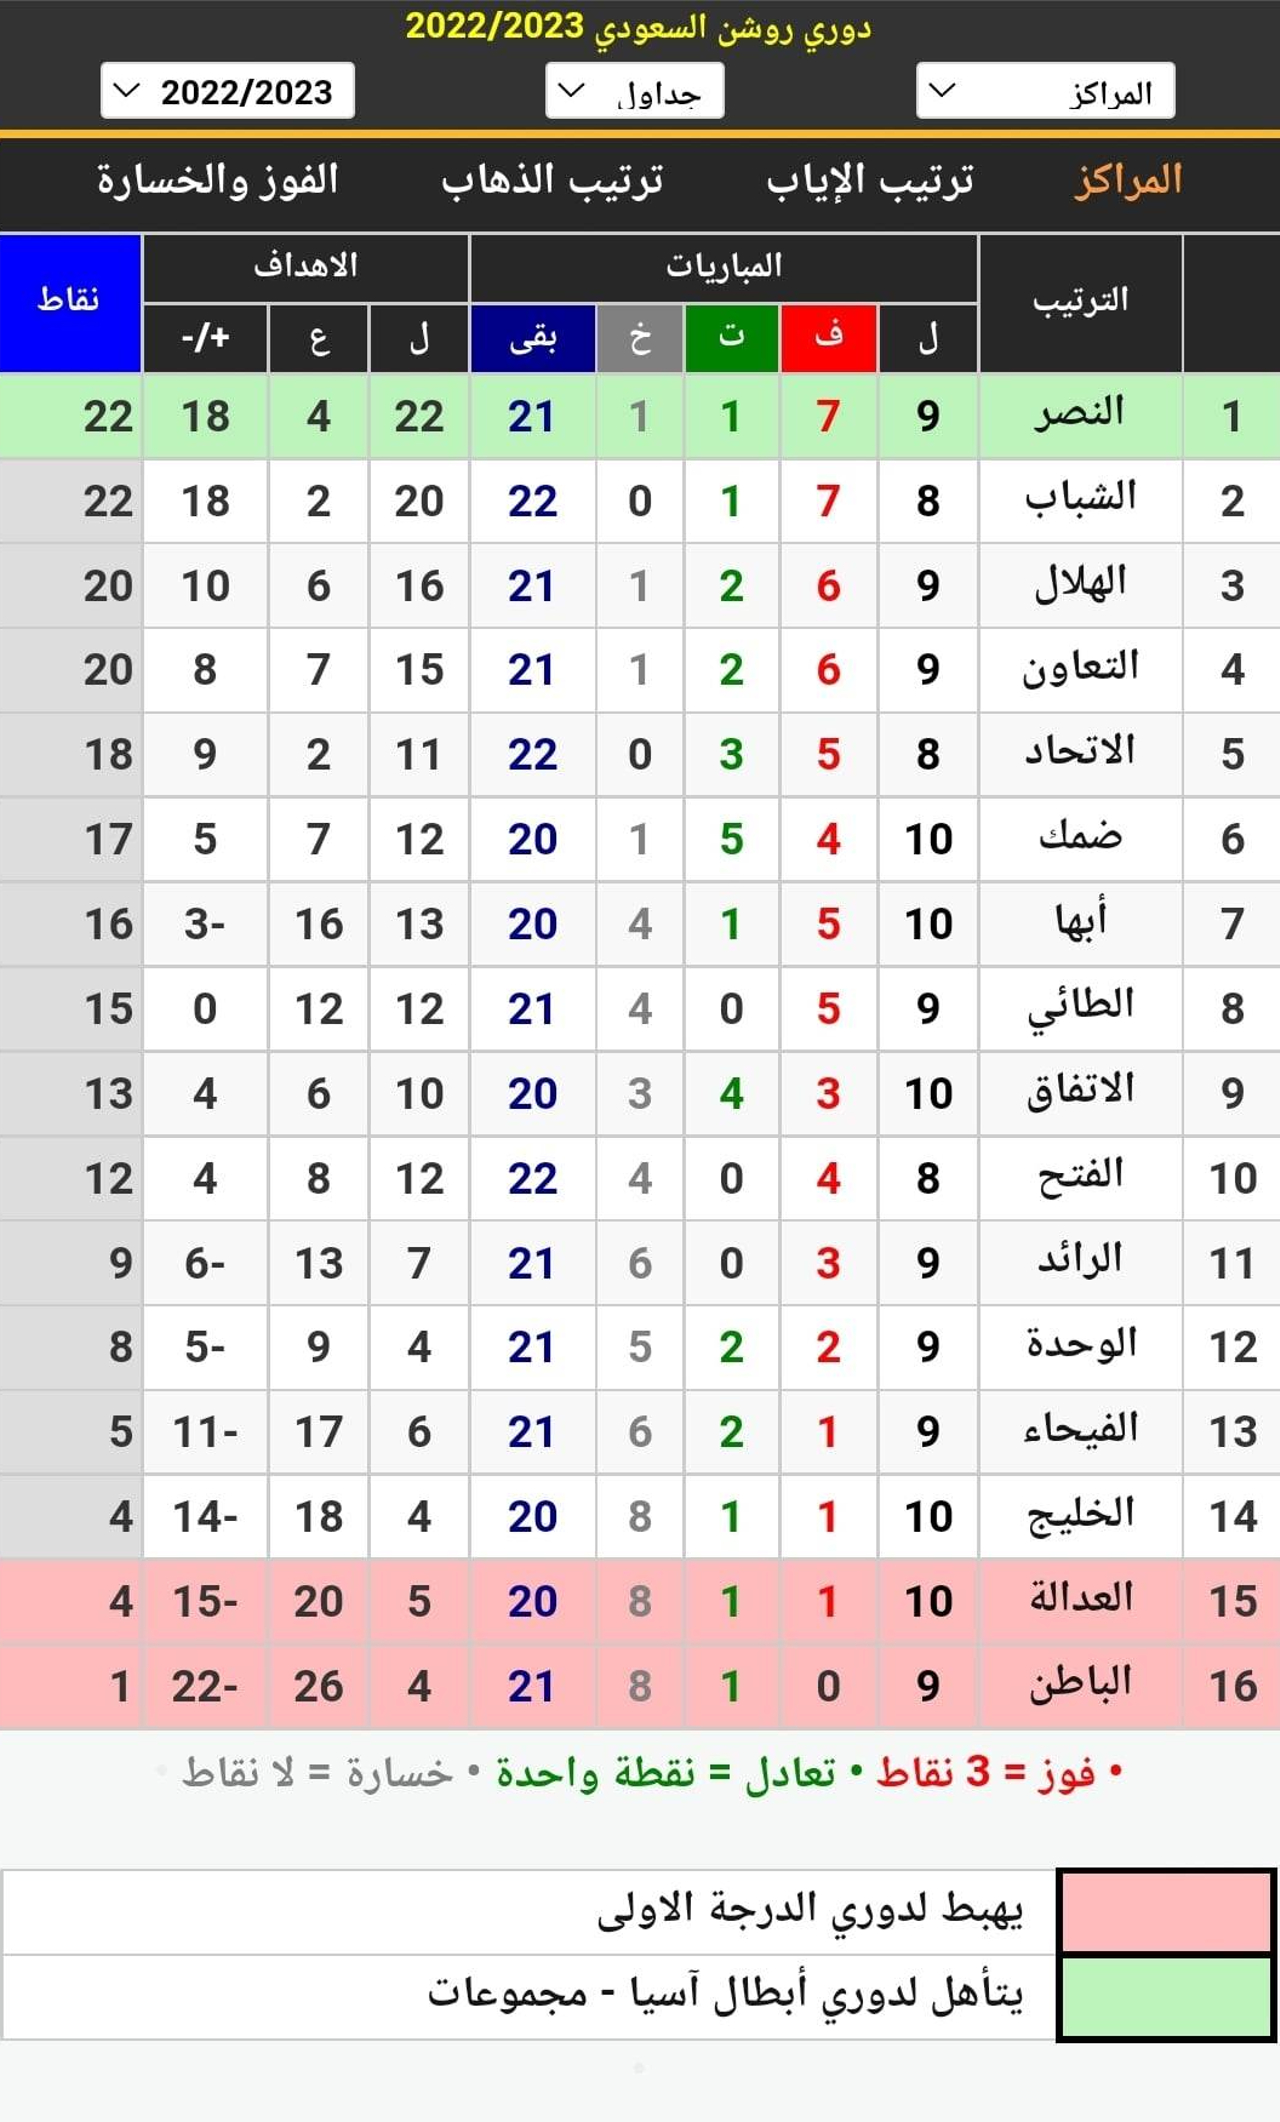 Table Roshen Saudi Professional League 2023 standings during the tenth round, after the end of the first day's matches